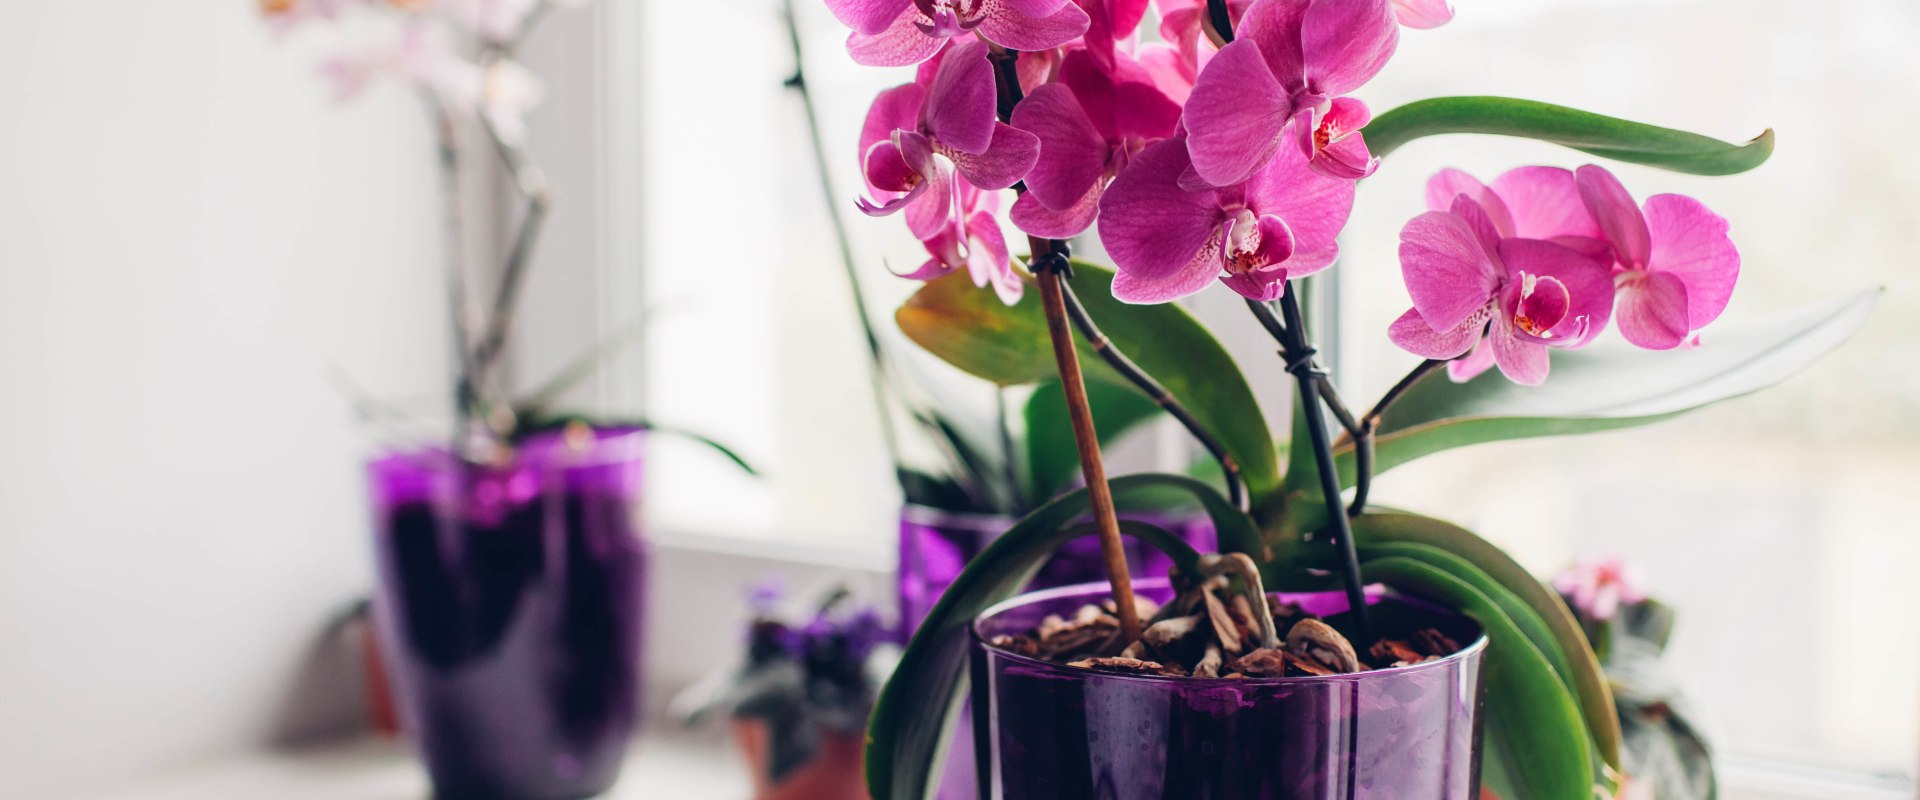 Common Mistakes to Avoid When Growing Orchids